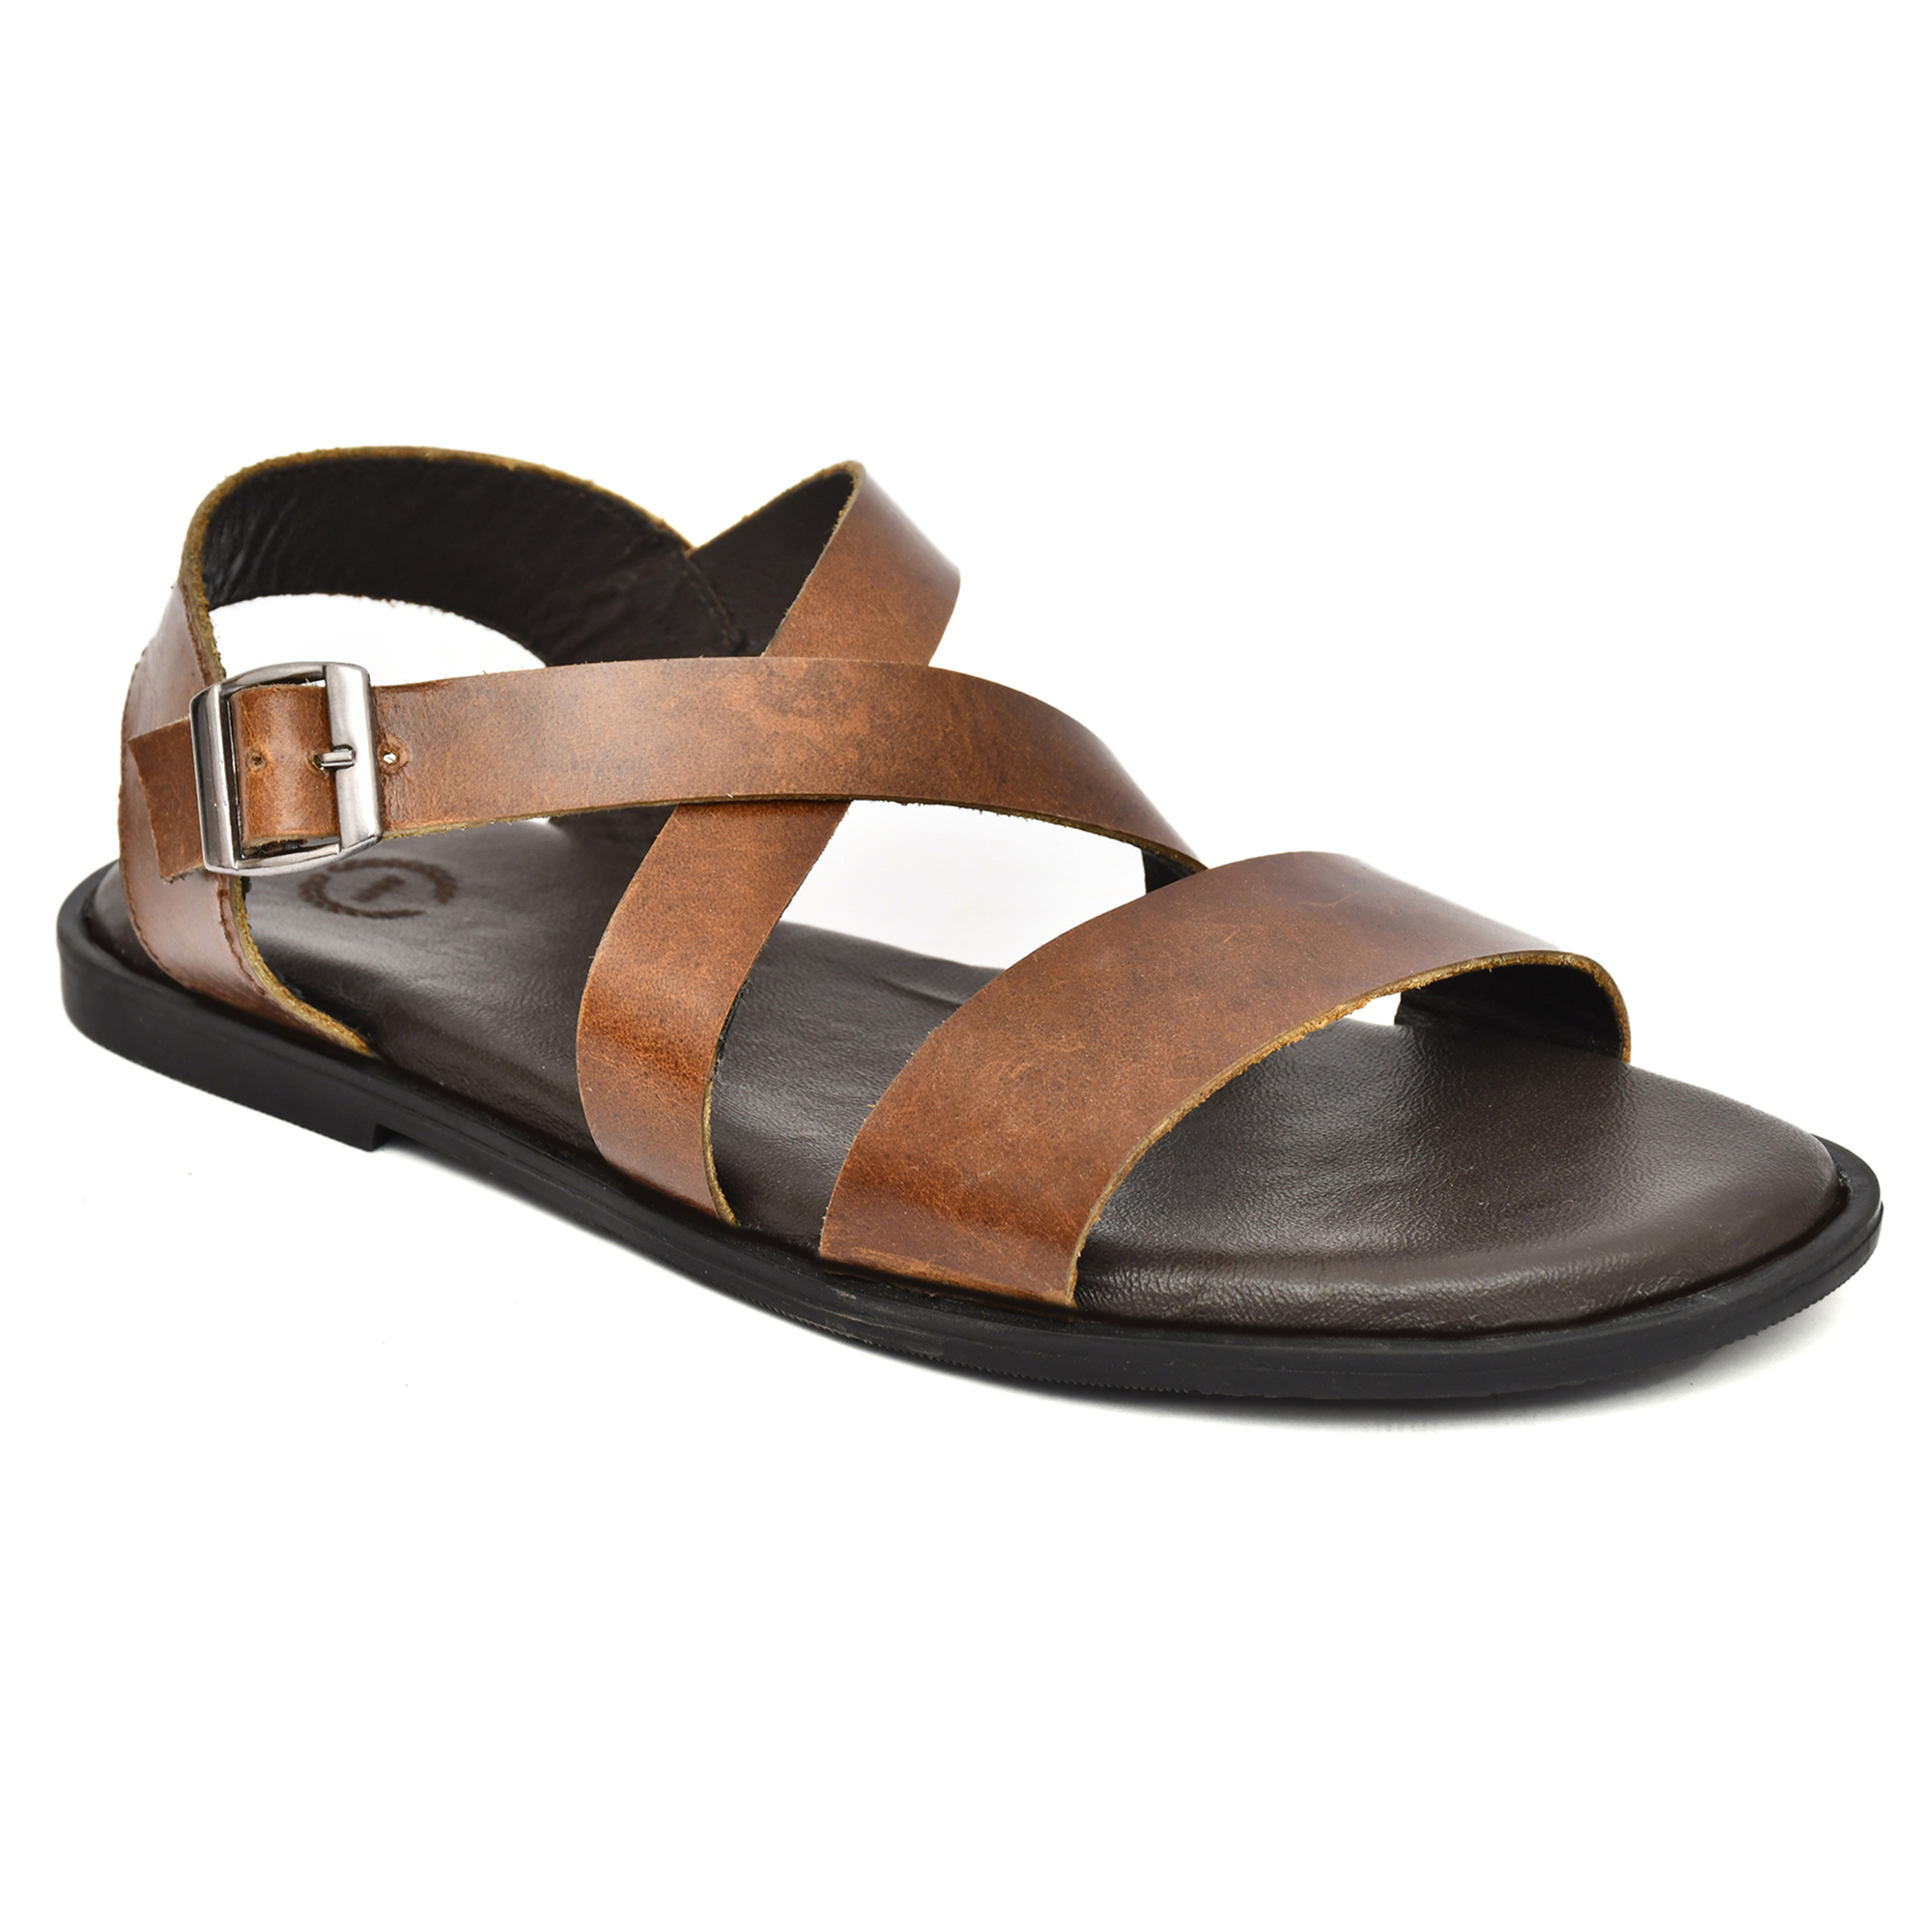 Brown Leather Sandals for Mens with Memory foam footpad by asm.